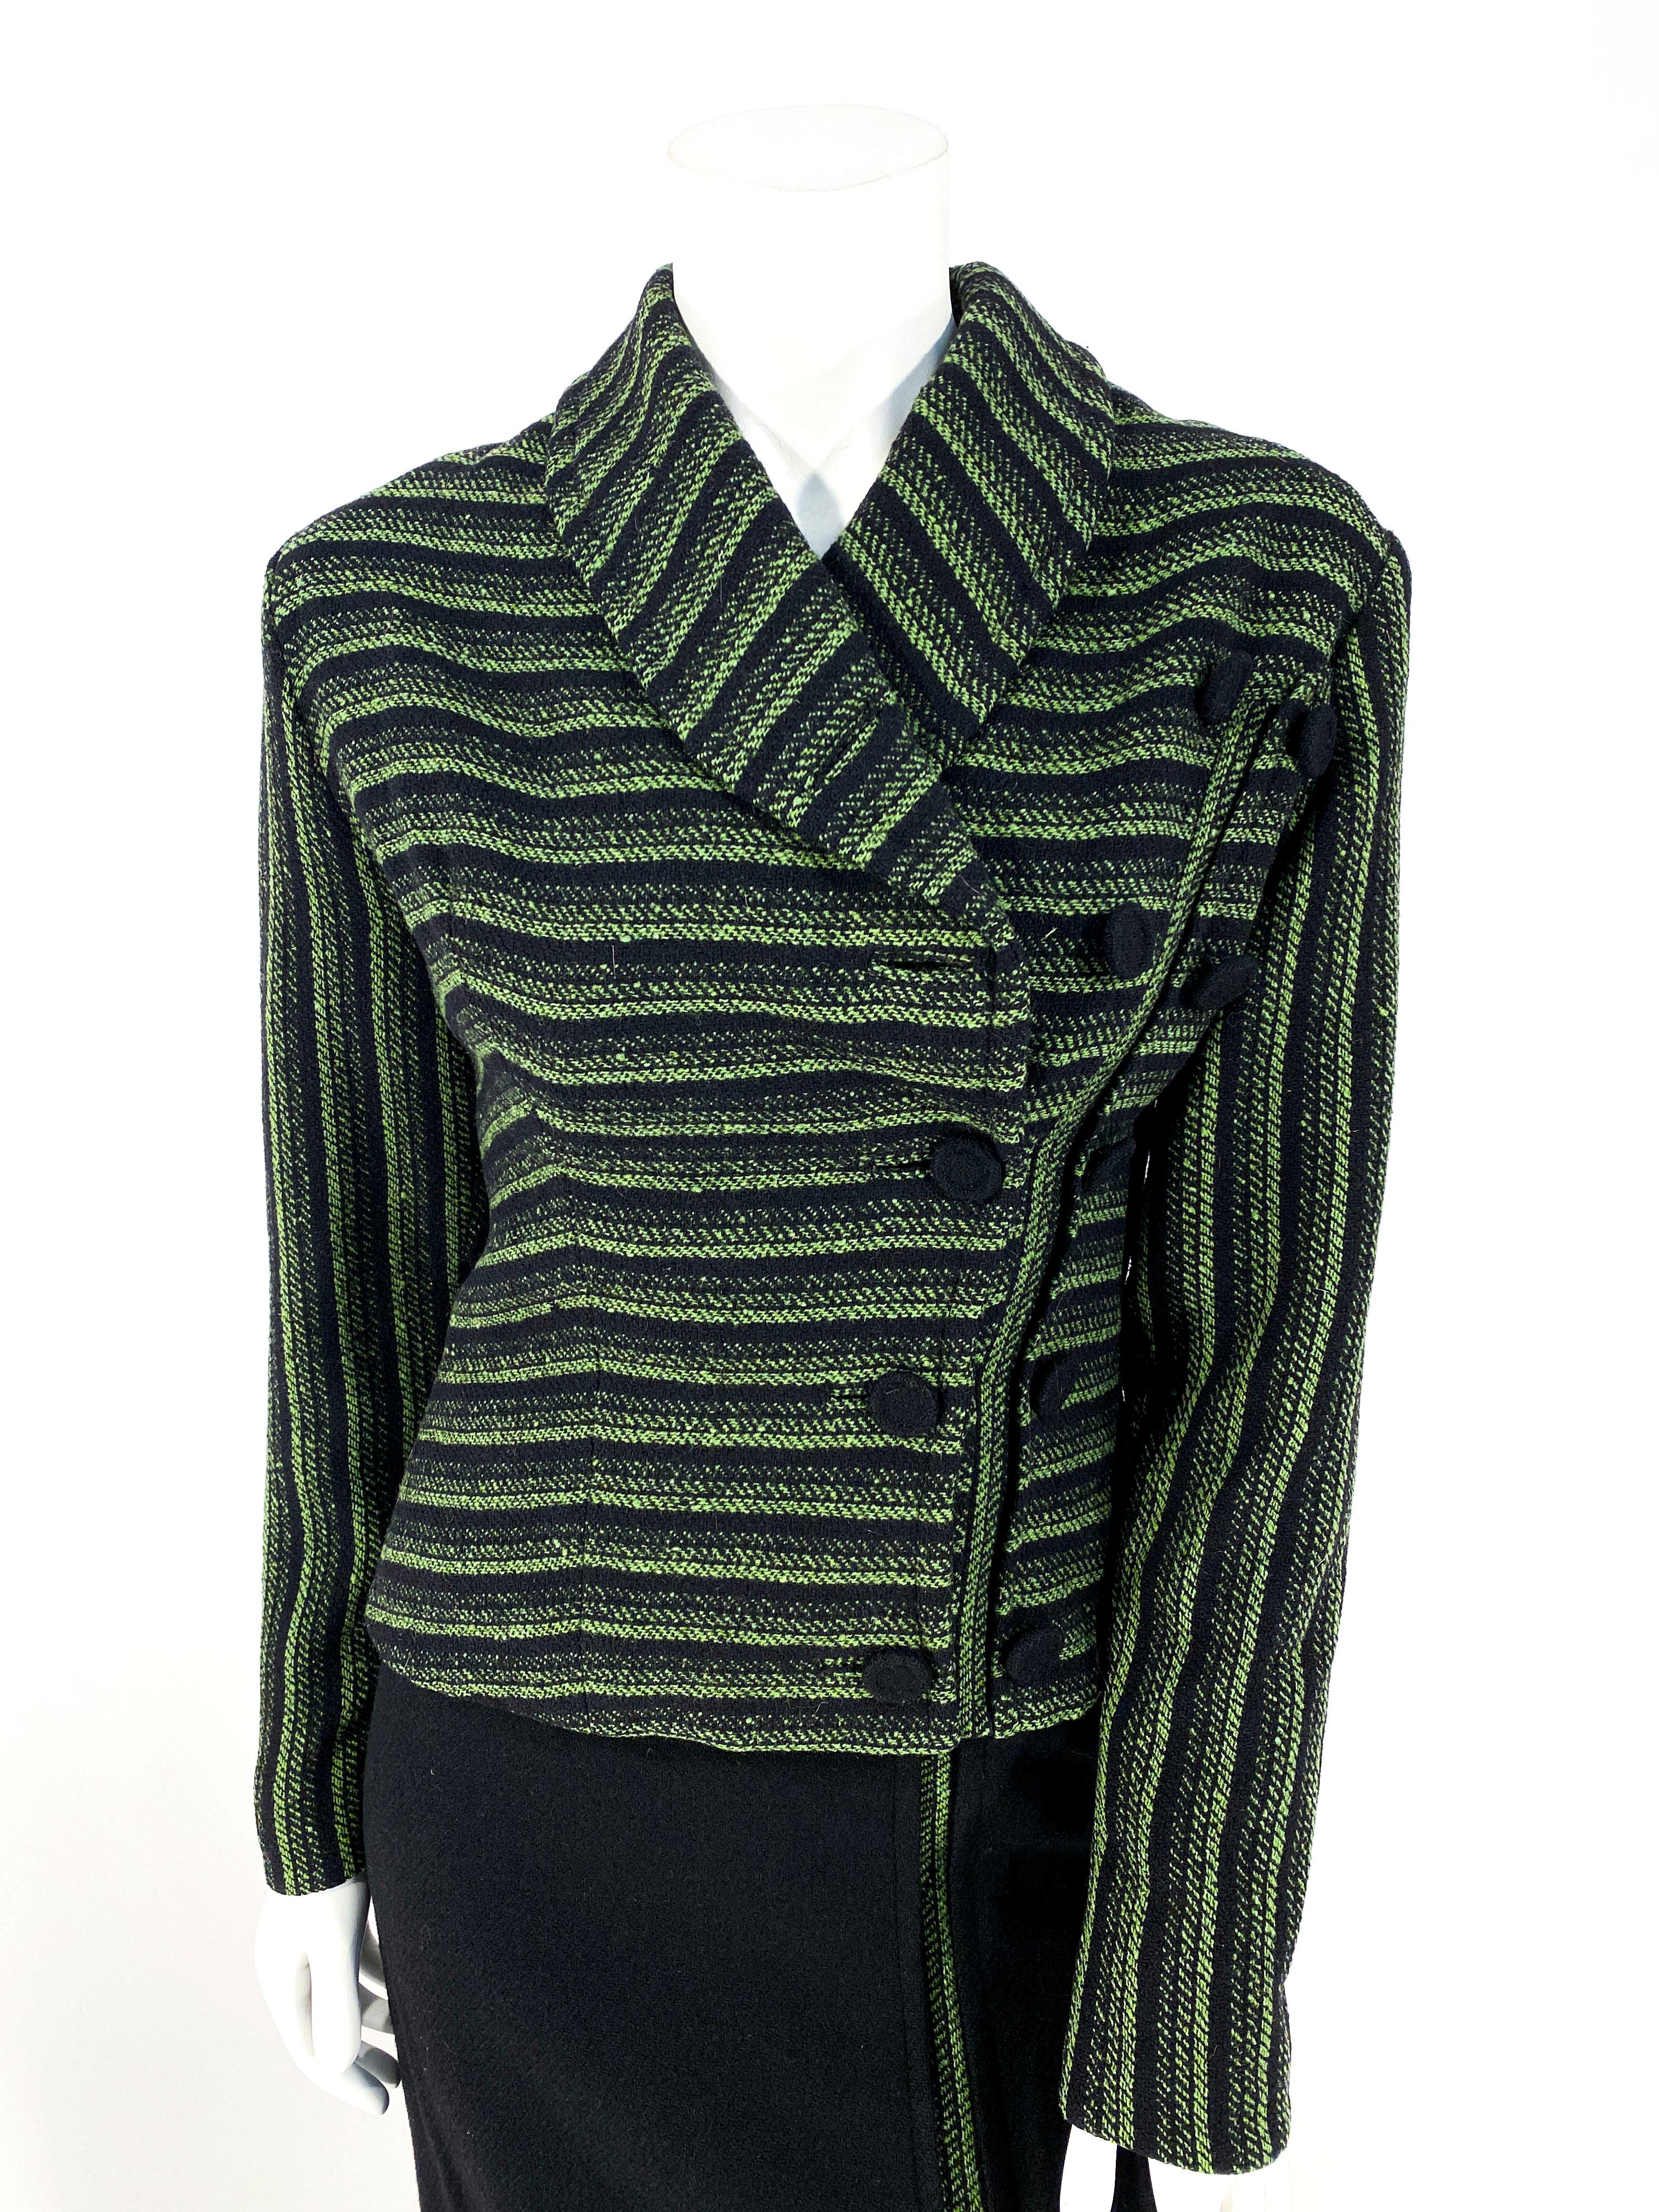 1950s wool suit featuring shades of olive, sage, and forest green with an asymmetrical button closure accented with additional matching hand-covered buttons. The shawl collar is modified to accommodate the asymmetrical closure. The black wool has a